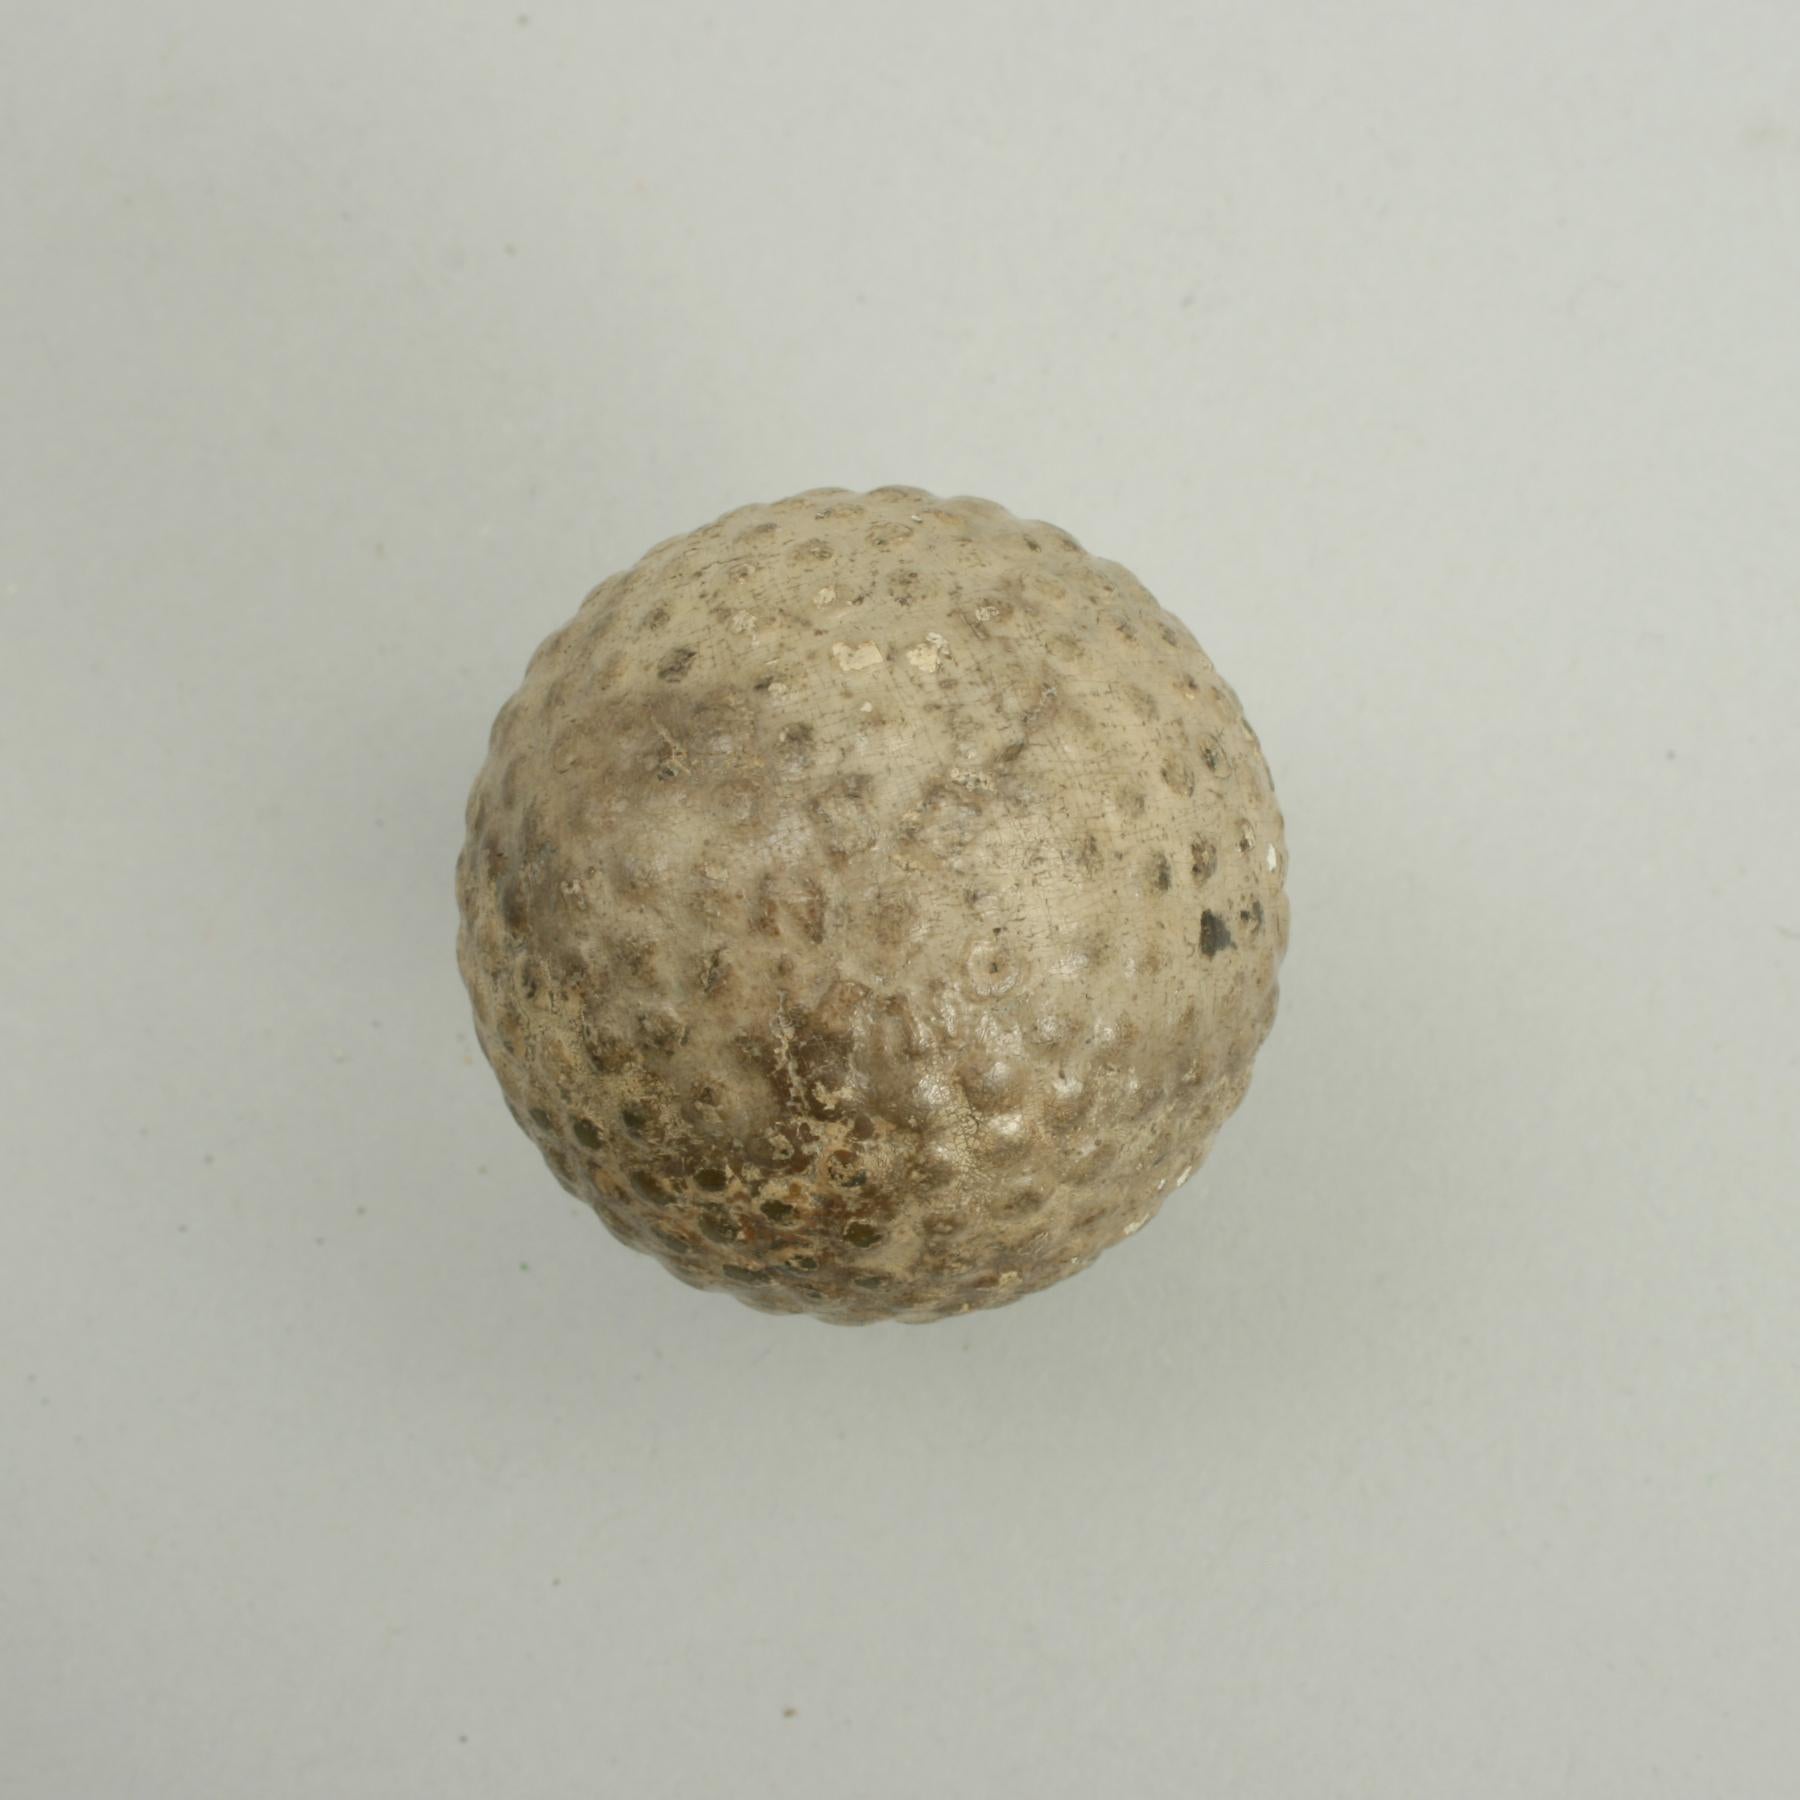 Martins bramble 'Zodiac' golf ball.
A good example of a 'Zodiac' bramble patterned rubber core golf ball. The golf ball is in fair condition and is manufactured by Martins, England, circa 1906. The ball is marked 'Zodiac' on one pole and 'ZBZ ENG'